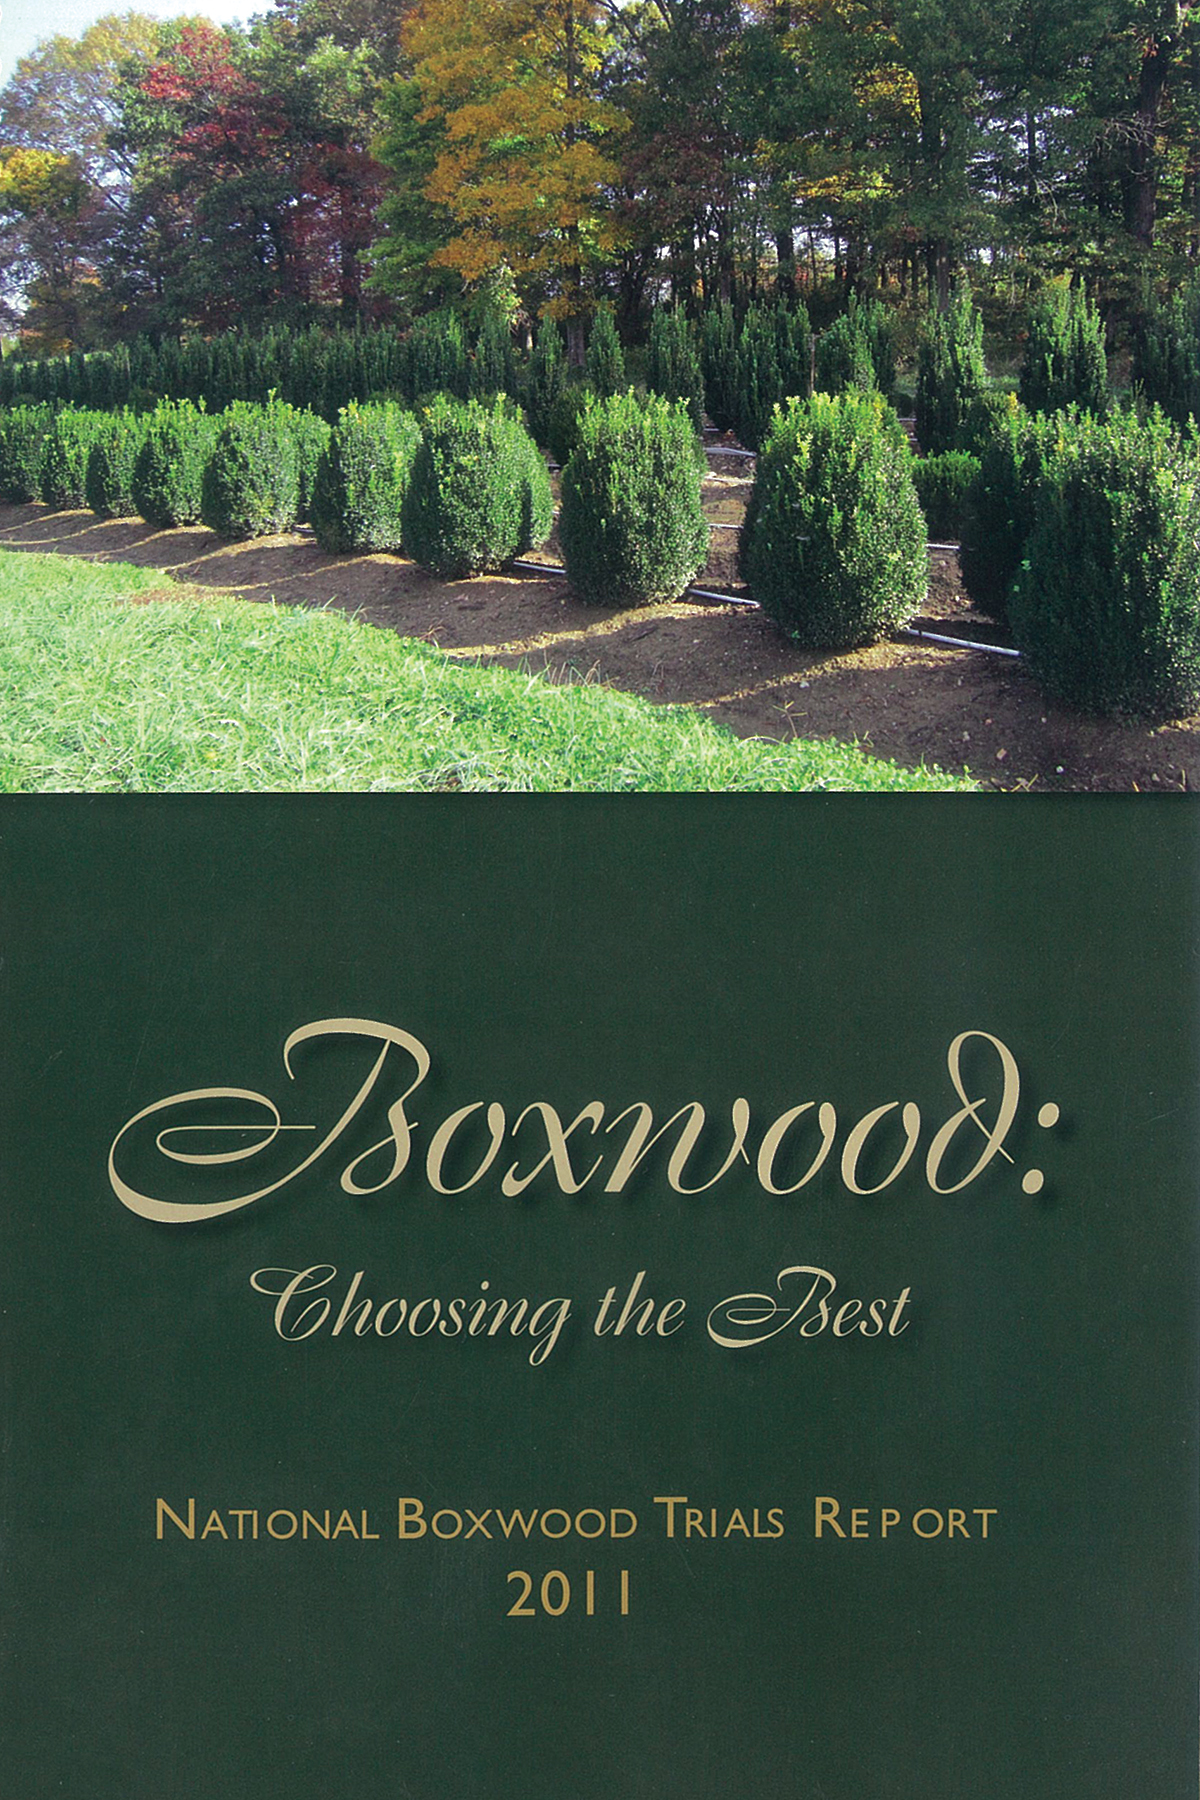 Events The American Boxwood Society Boxwood Books Guides And